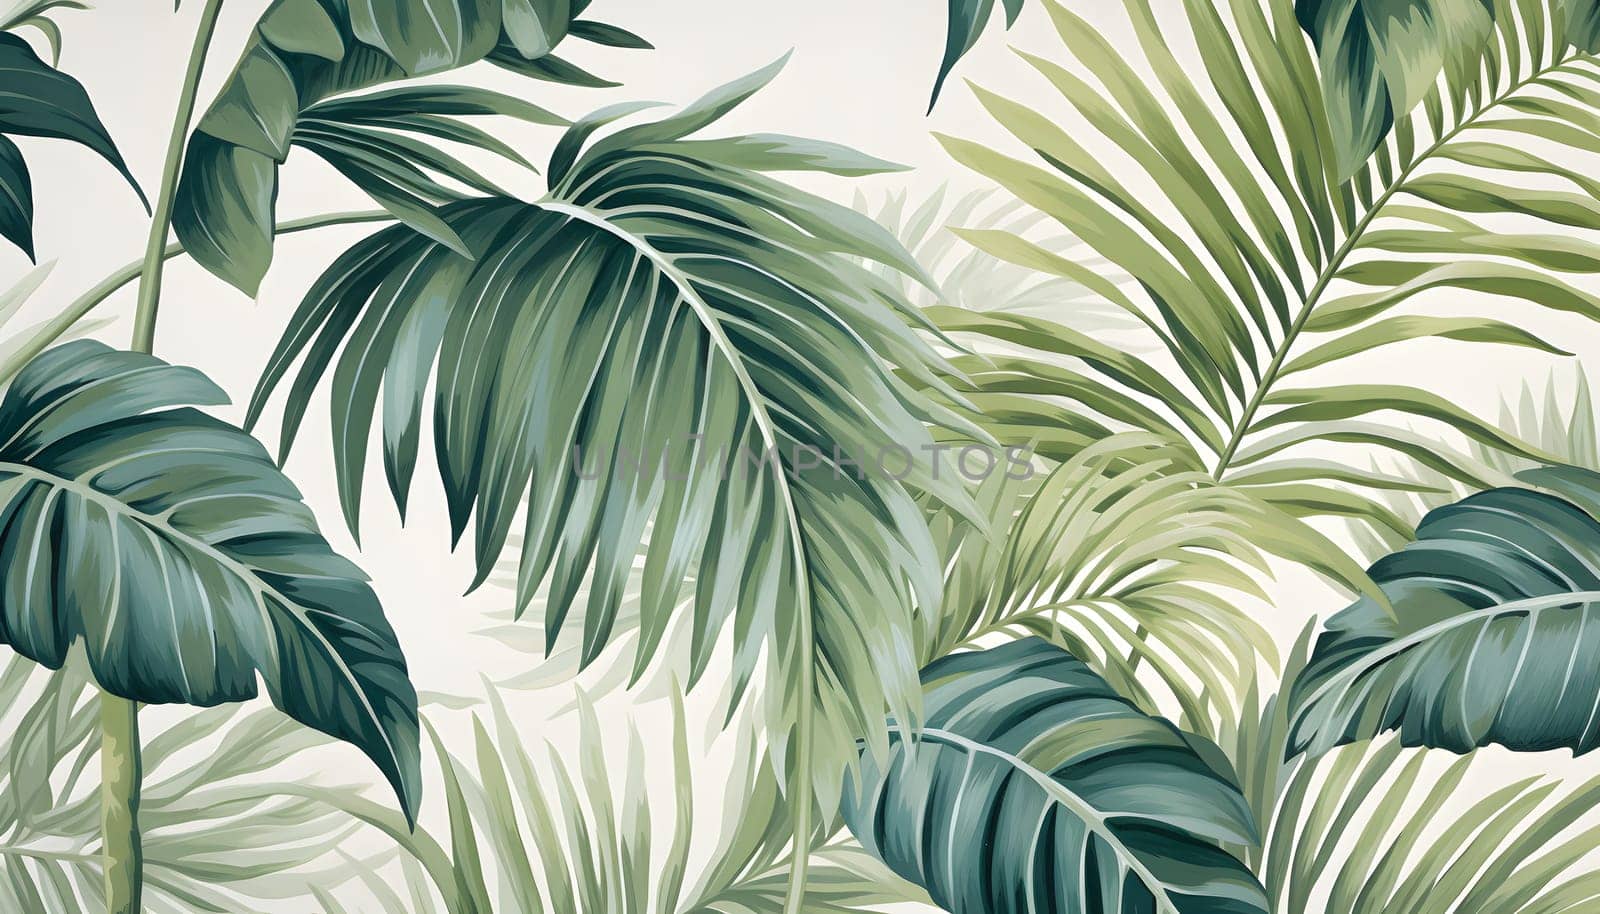 This photo showcases a wall completely covered with vibrant green palm leaves, creating a lush and tropical atmosphere.